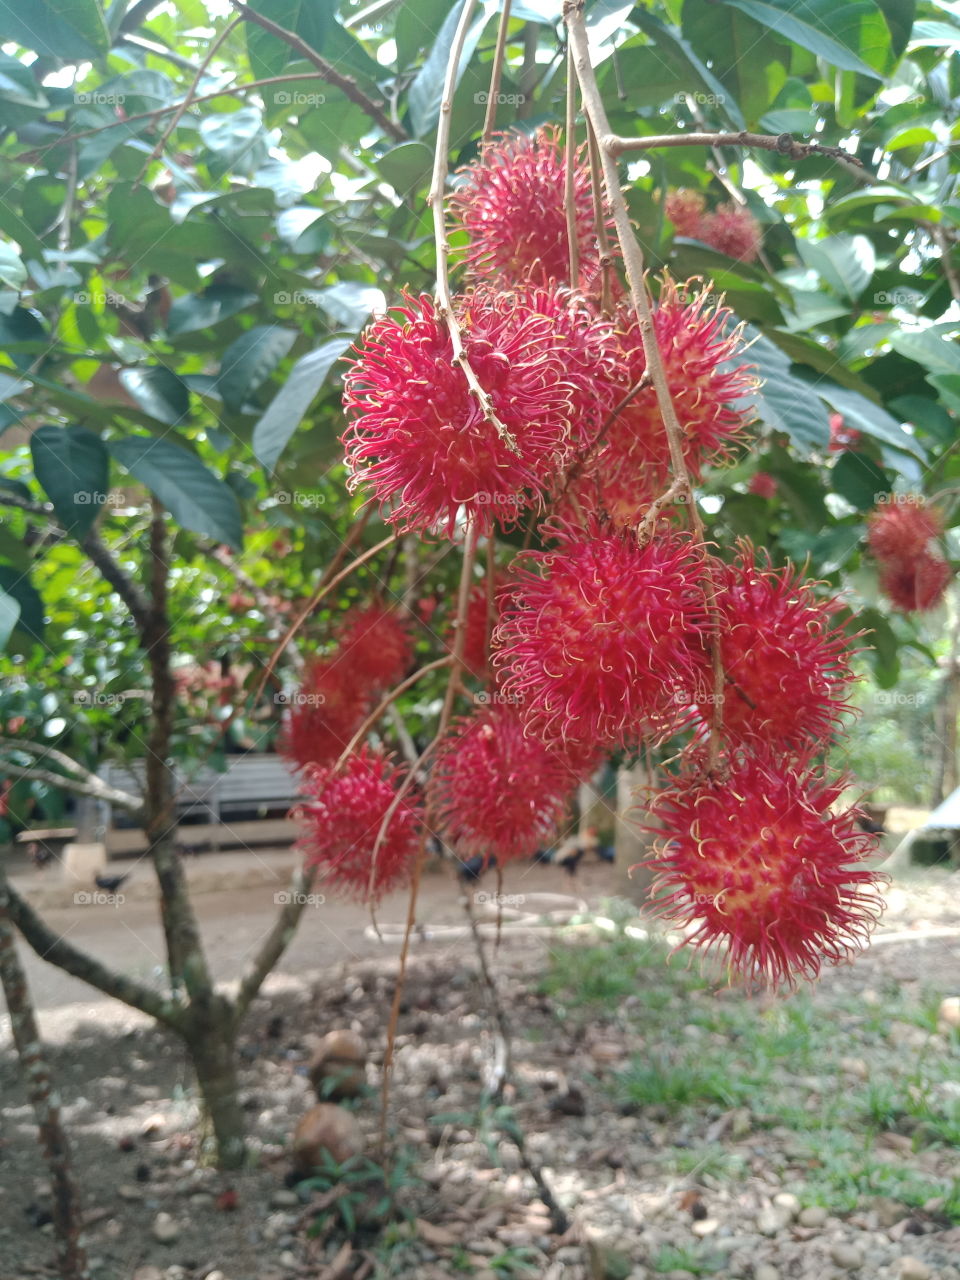 Rambutan is one of the most delicious fruits